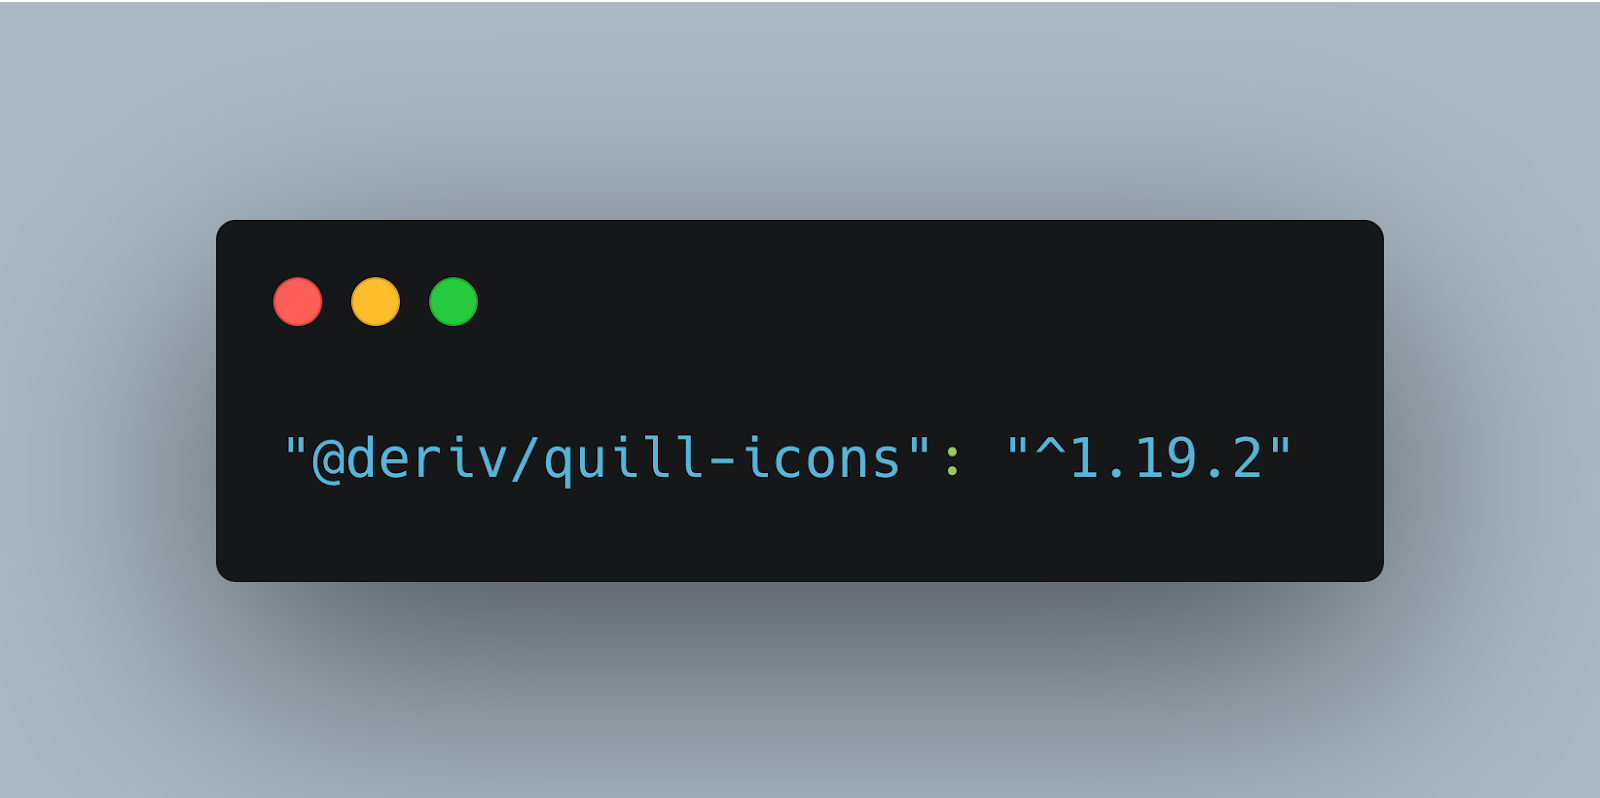 Code for adding quill icons on the Deriv website